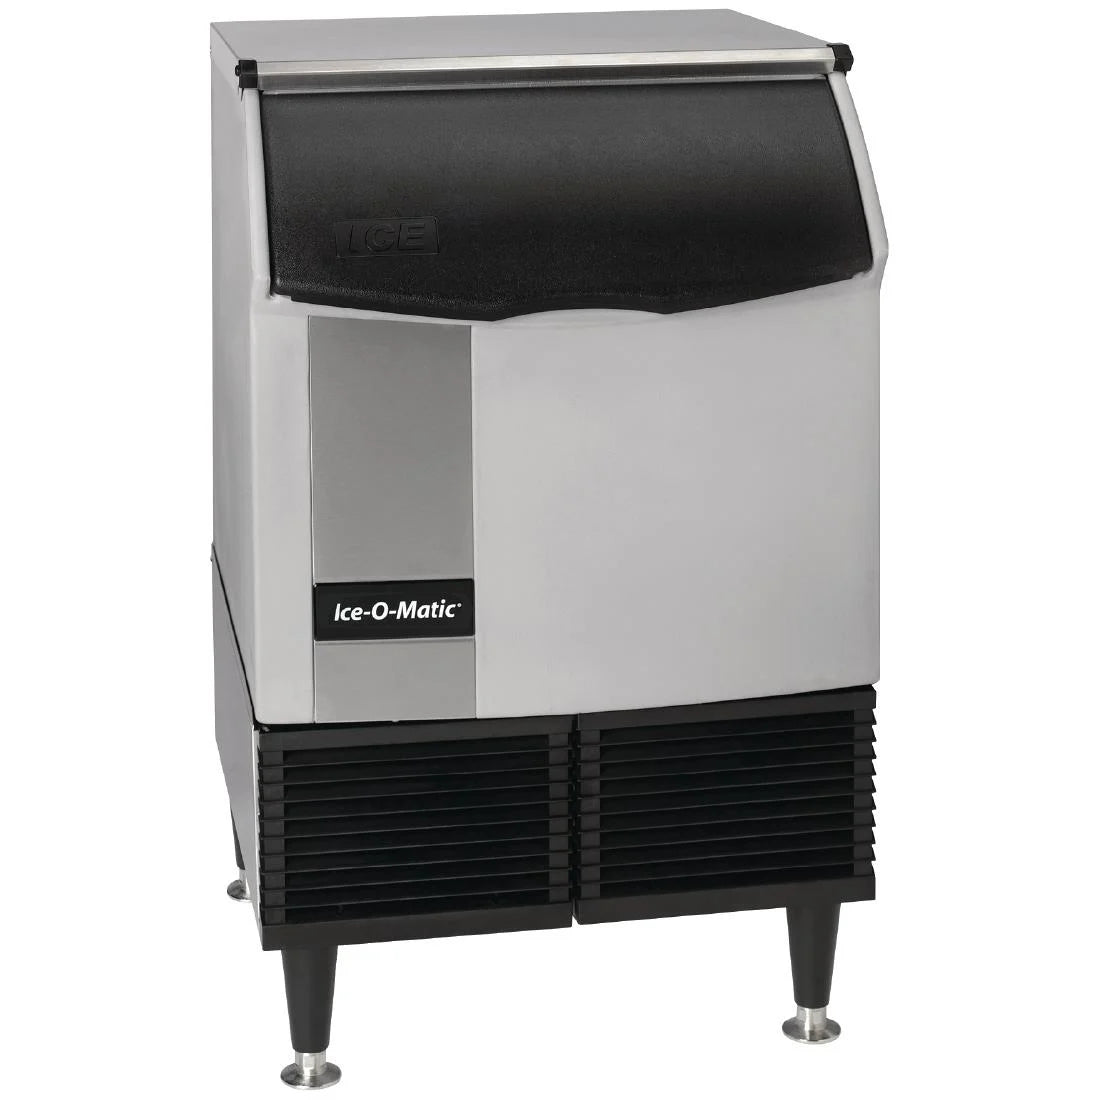 Ice-O-Matic Half Cube Ice Machine 96kg Output ICEU225H.Product Ref:00549.MODEL: ICEU225H .🚚 3-5 Days Delivery